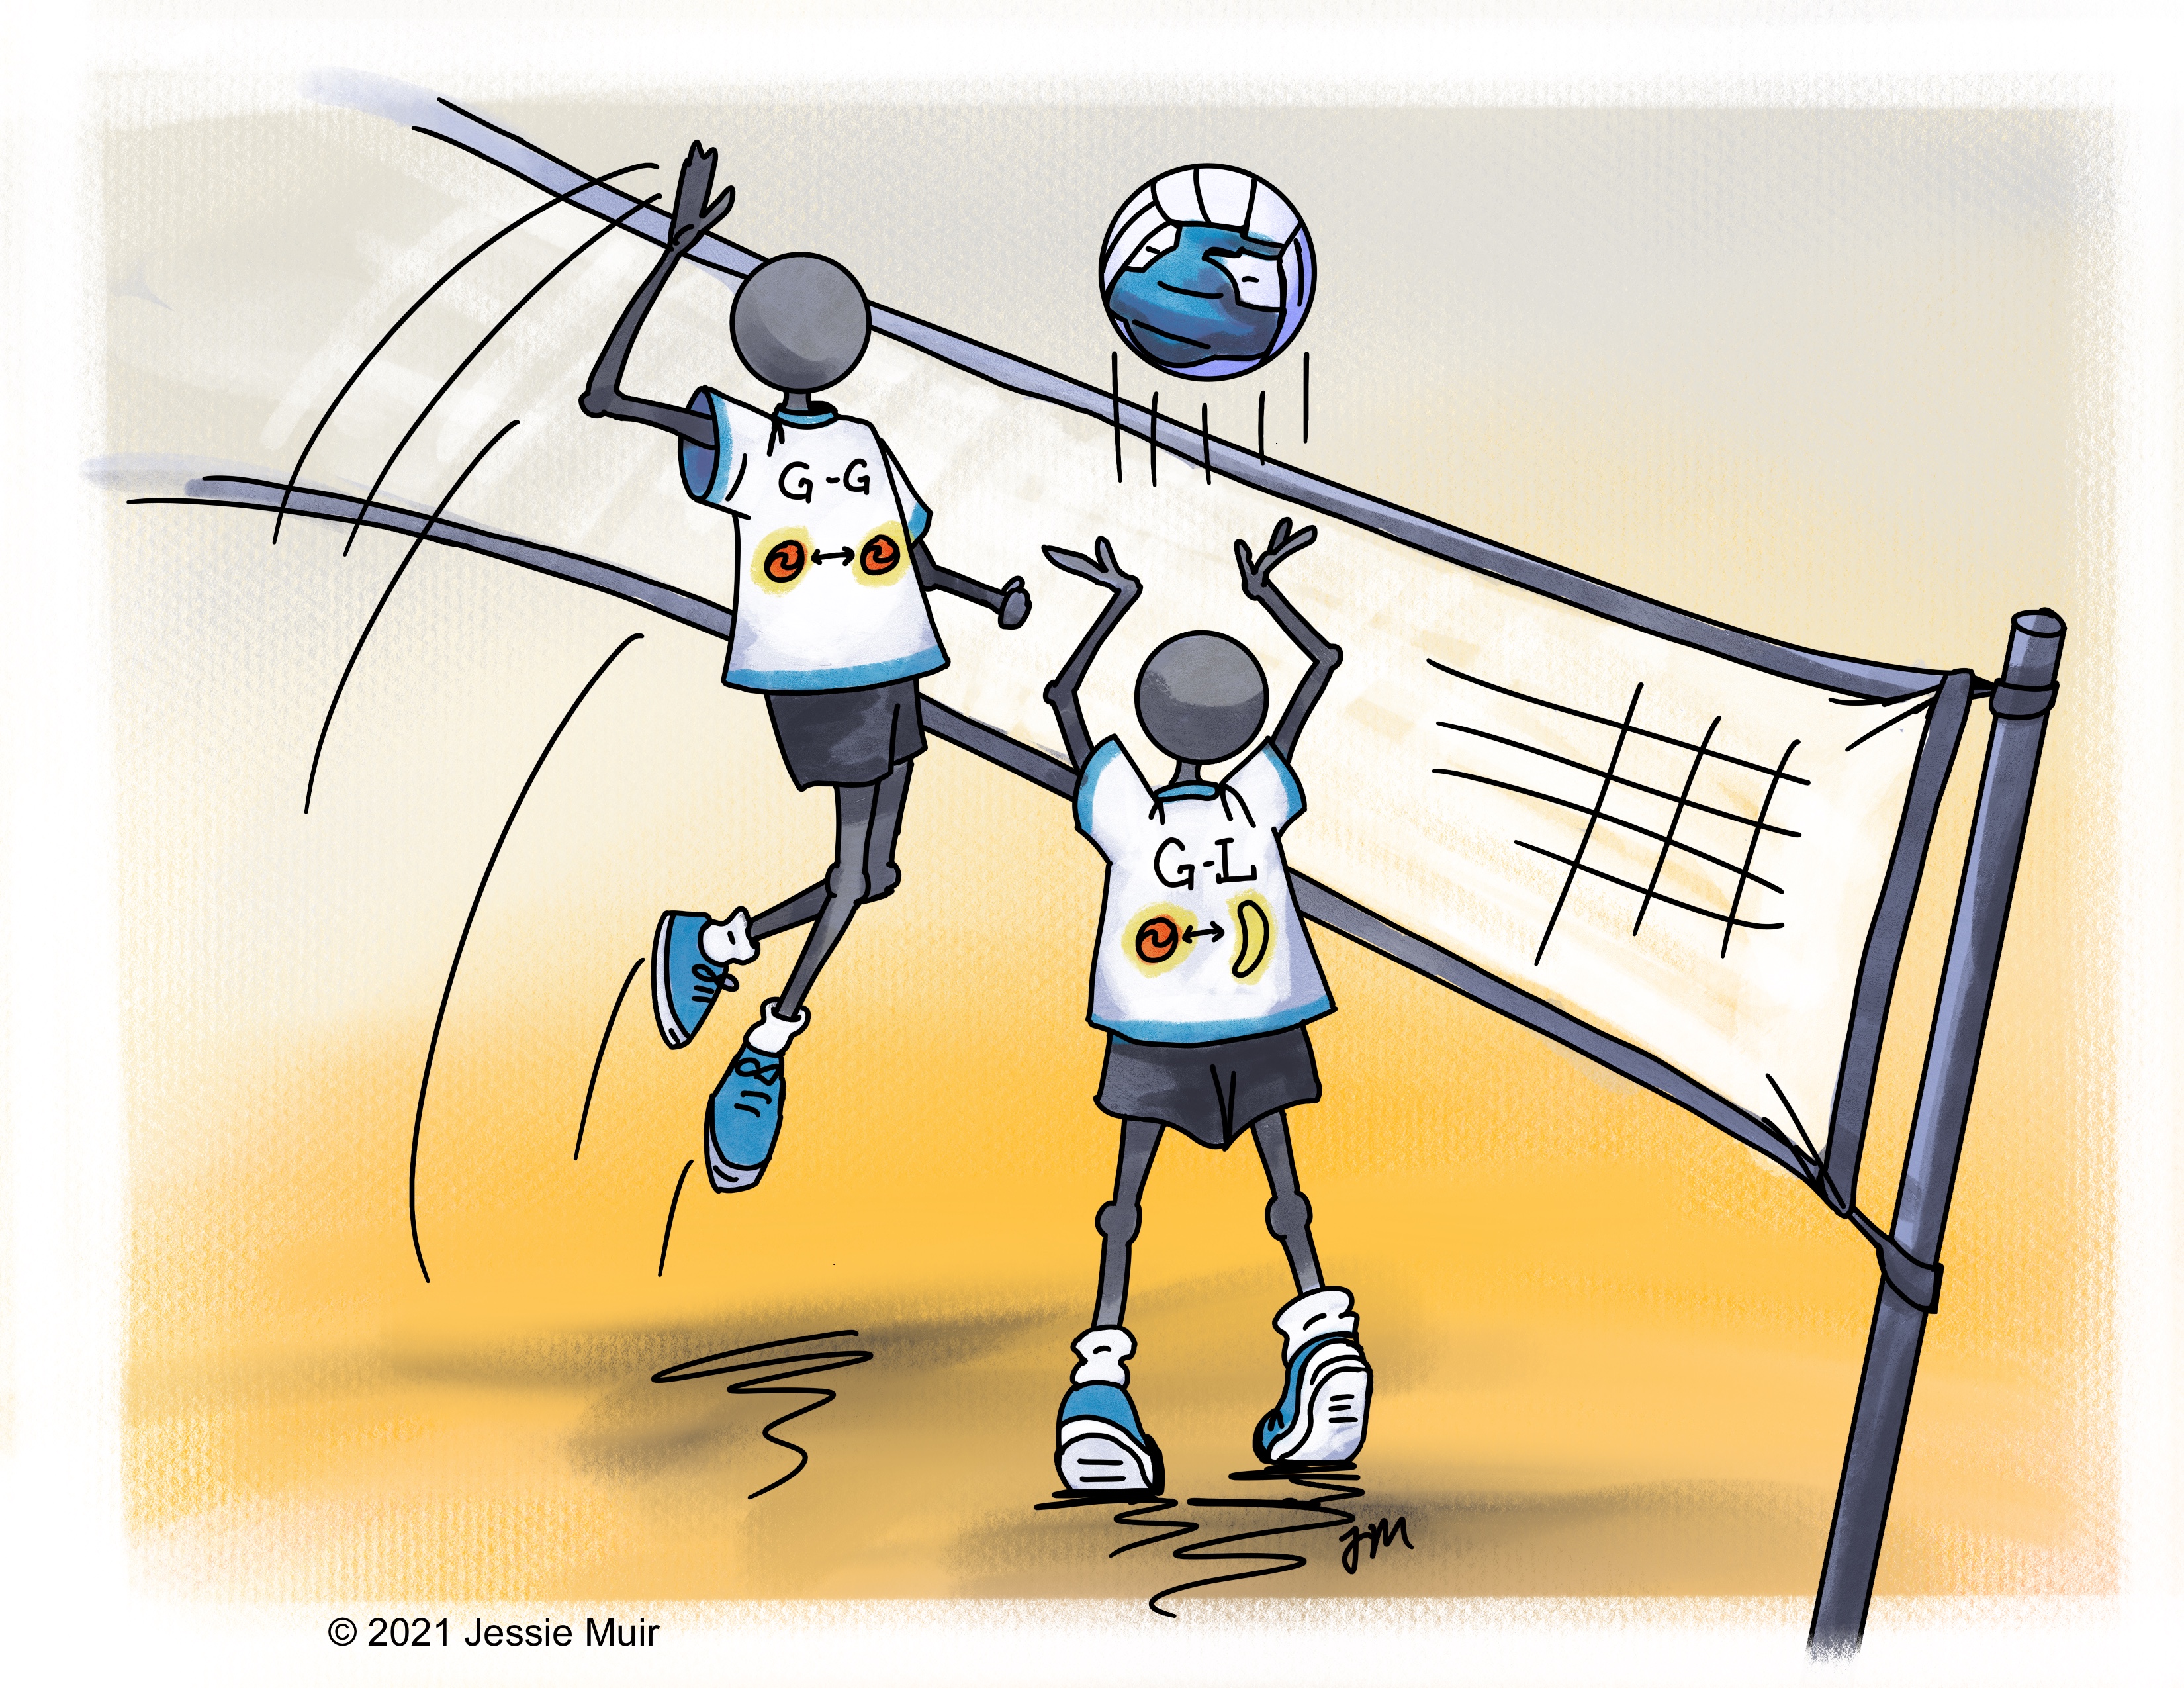 alt="Two stick figures playing volleyball wearing t-shirts representing cosmic shear and galaxy-galaxy lensing. One is setting the ball and the other is ready to spike it, showing how the two observables work together as a team to provide cosmological information."